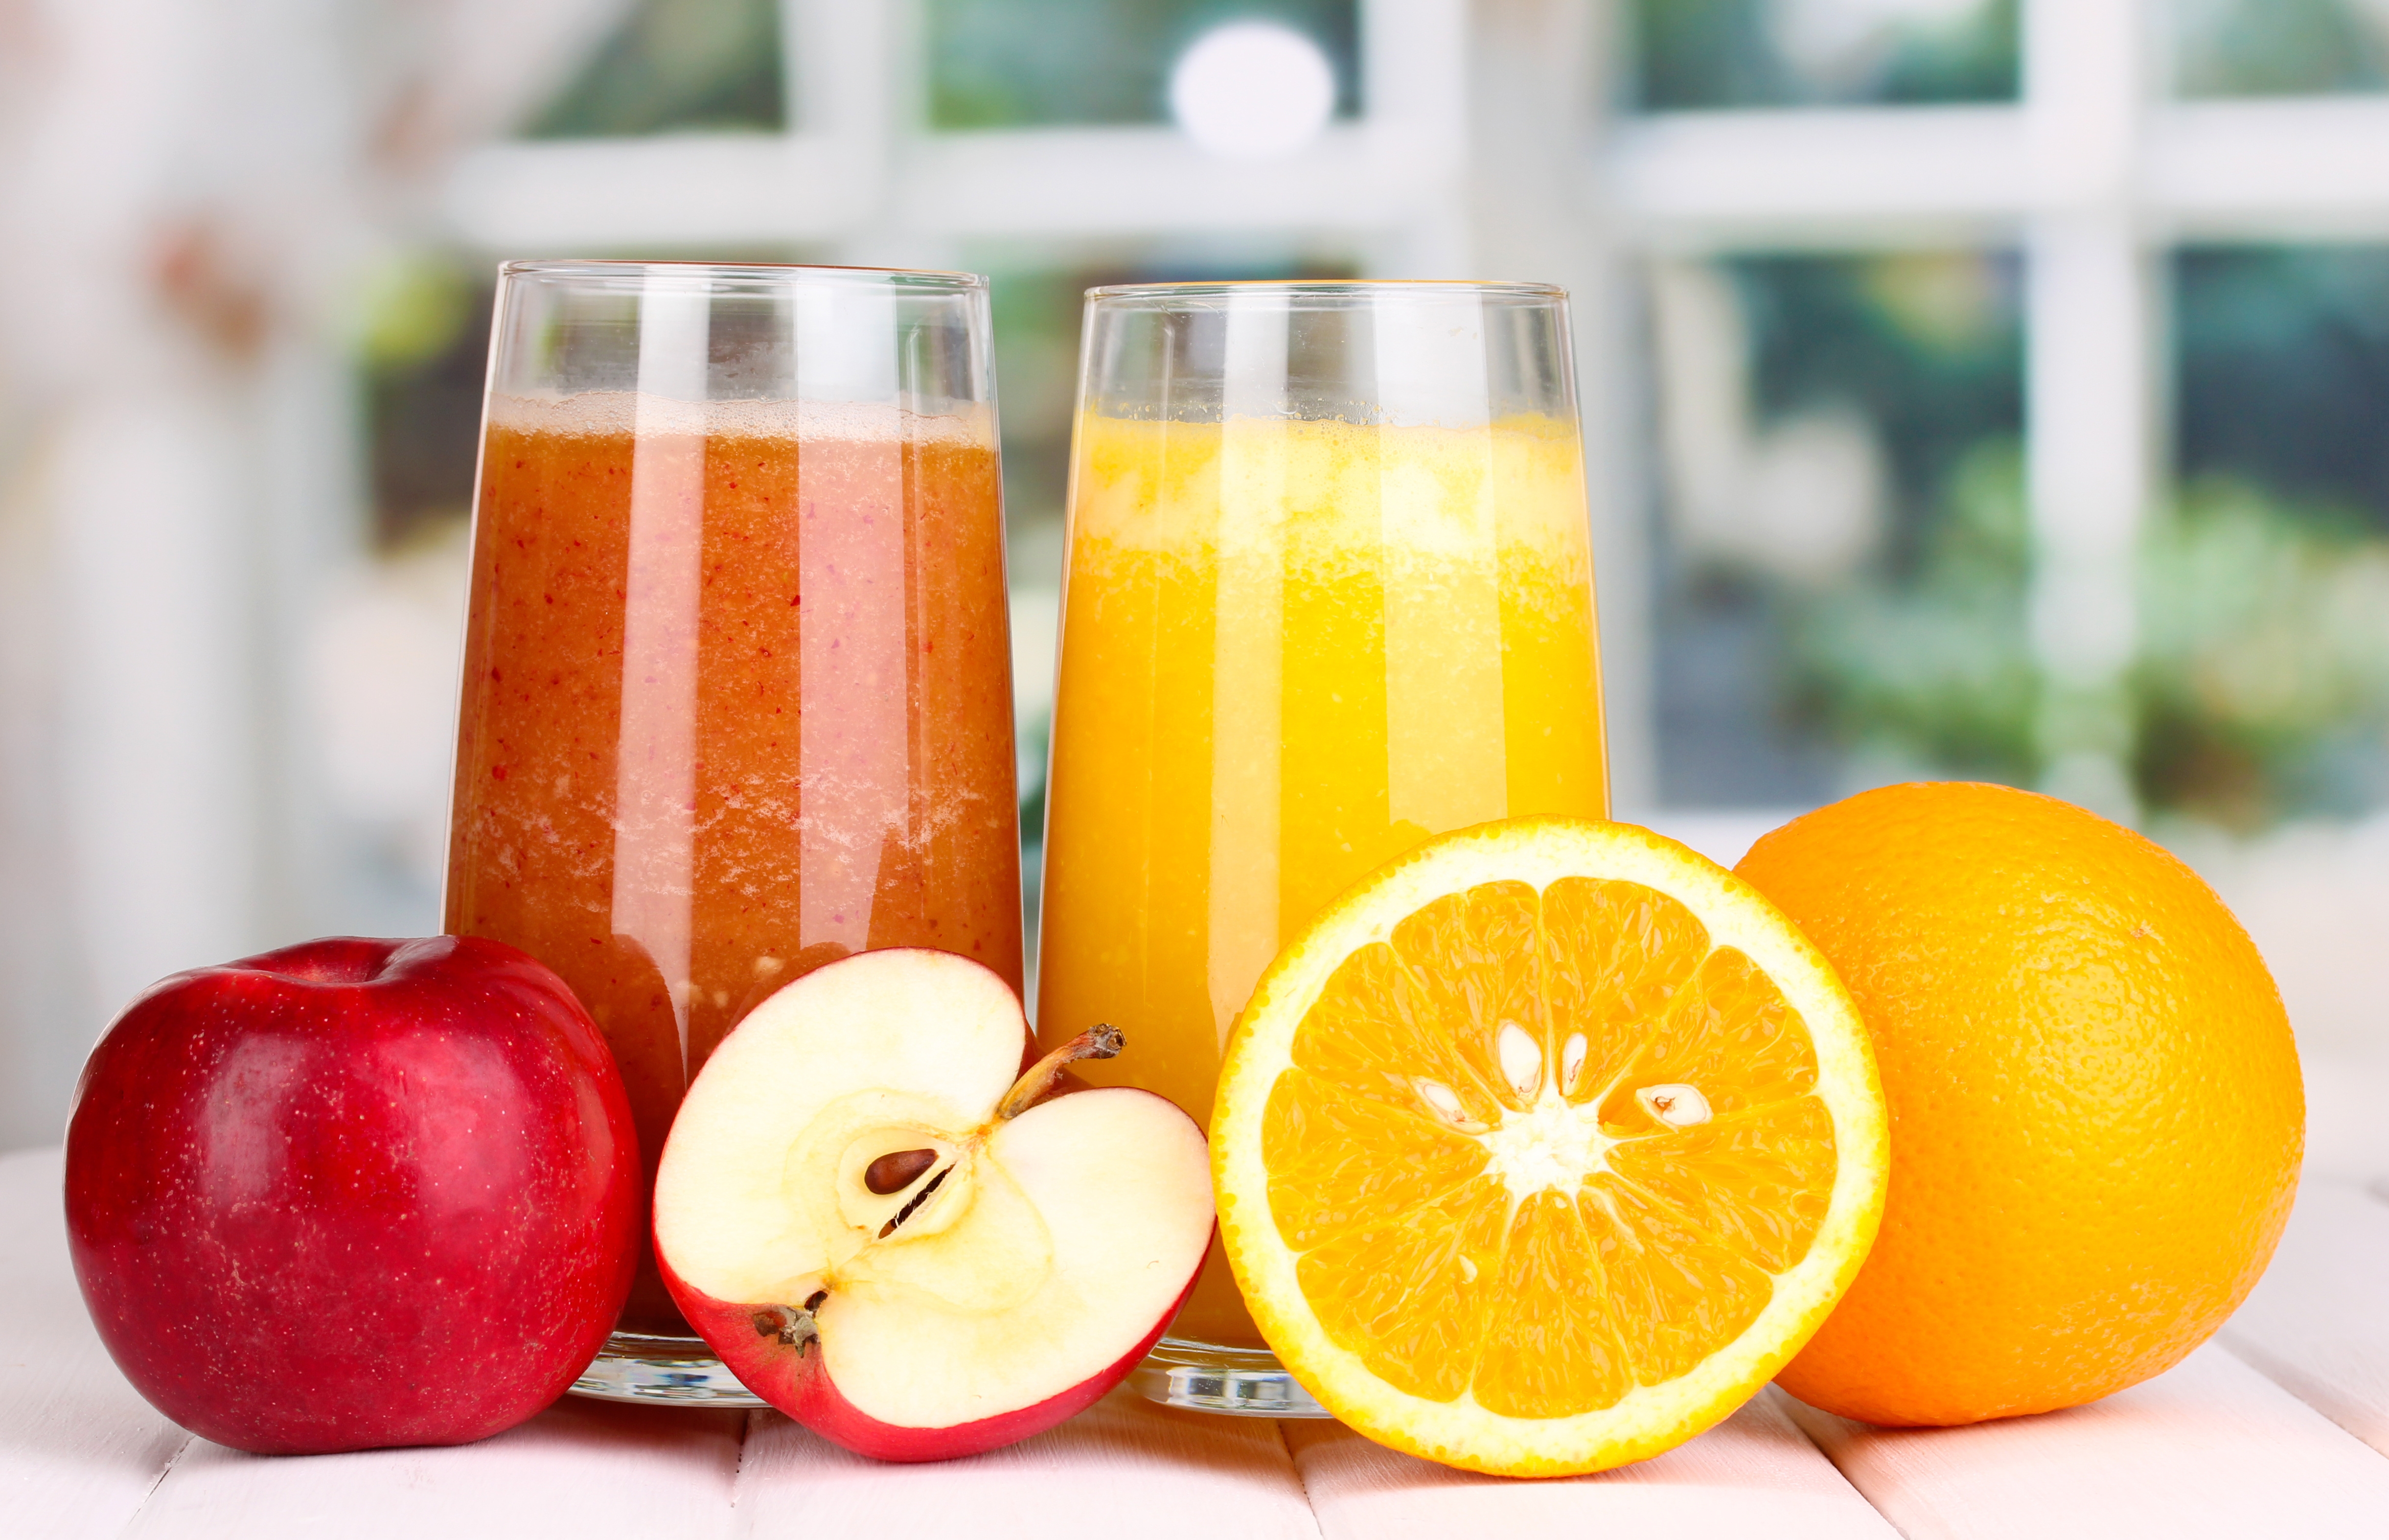 Freshly made juices